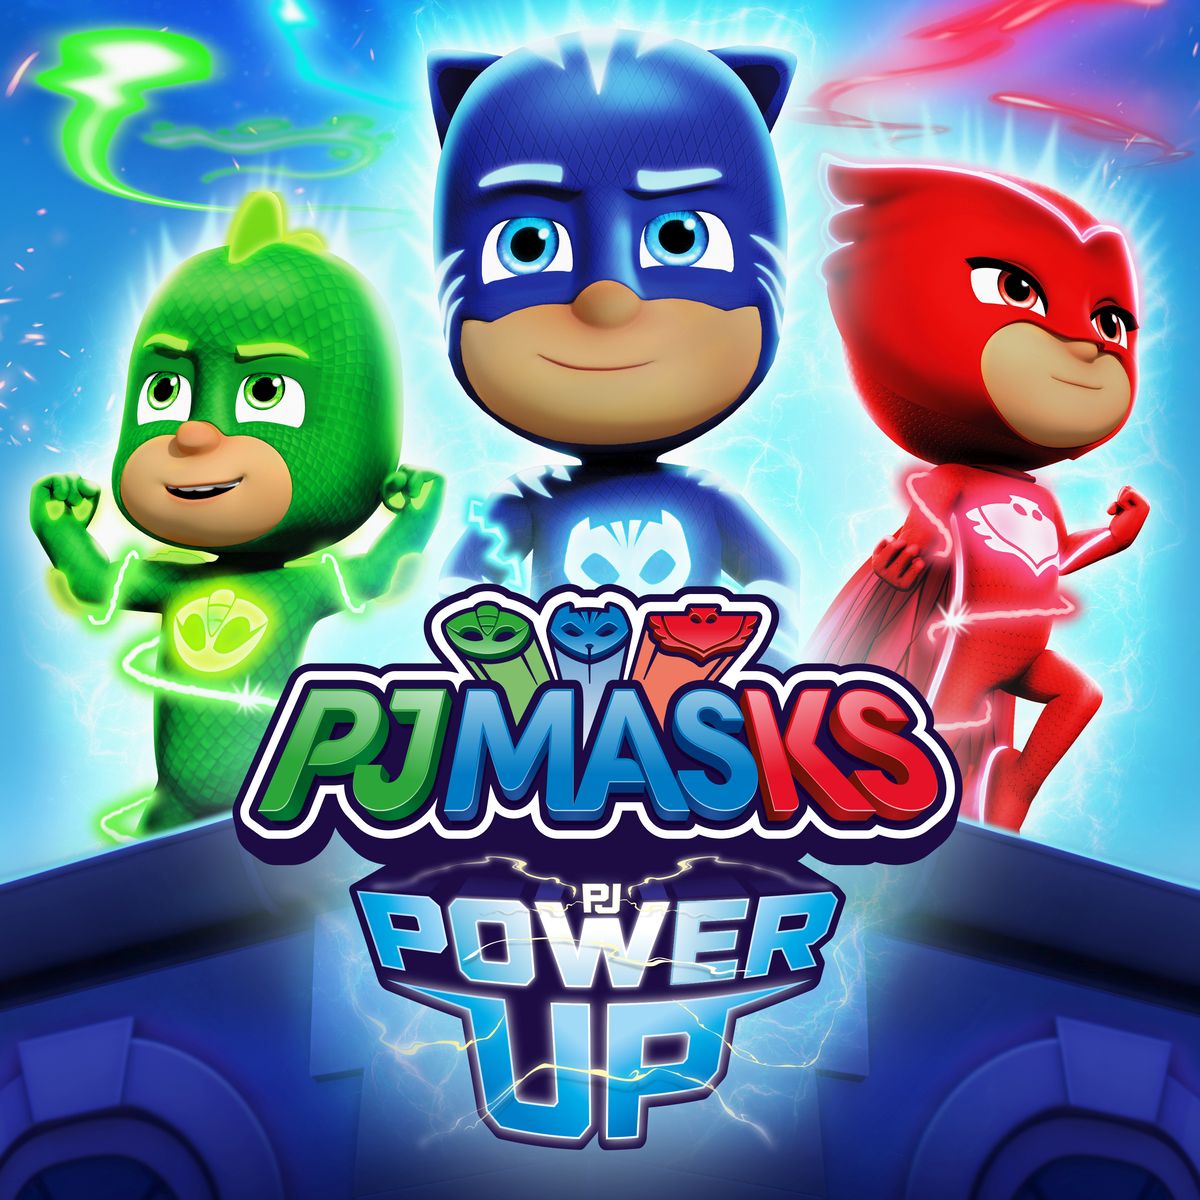 PJMasksLive up your week and stream 'Let's Fly' and the full PJ Masks Power Up album here